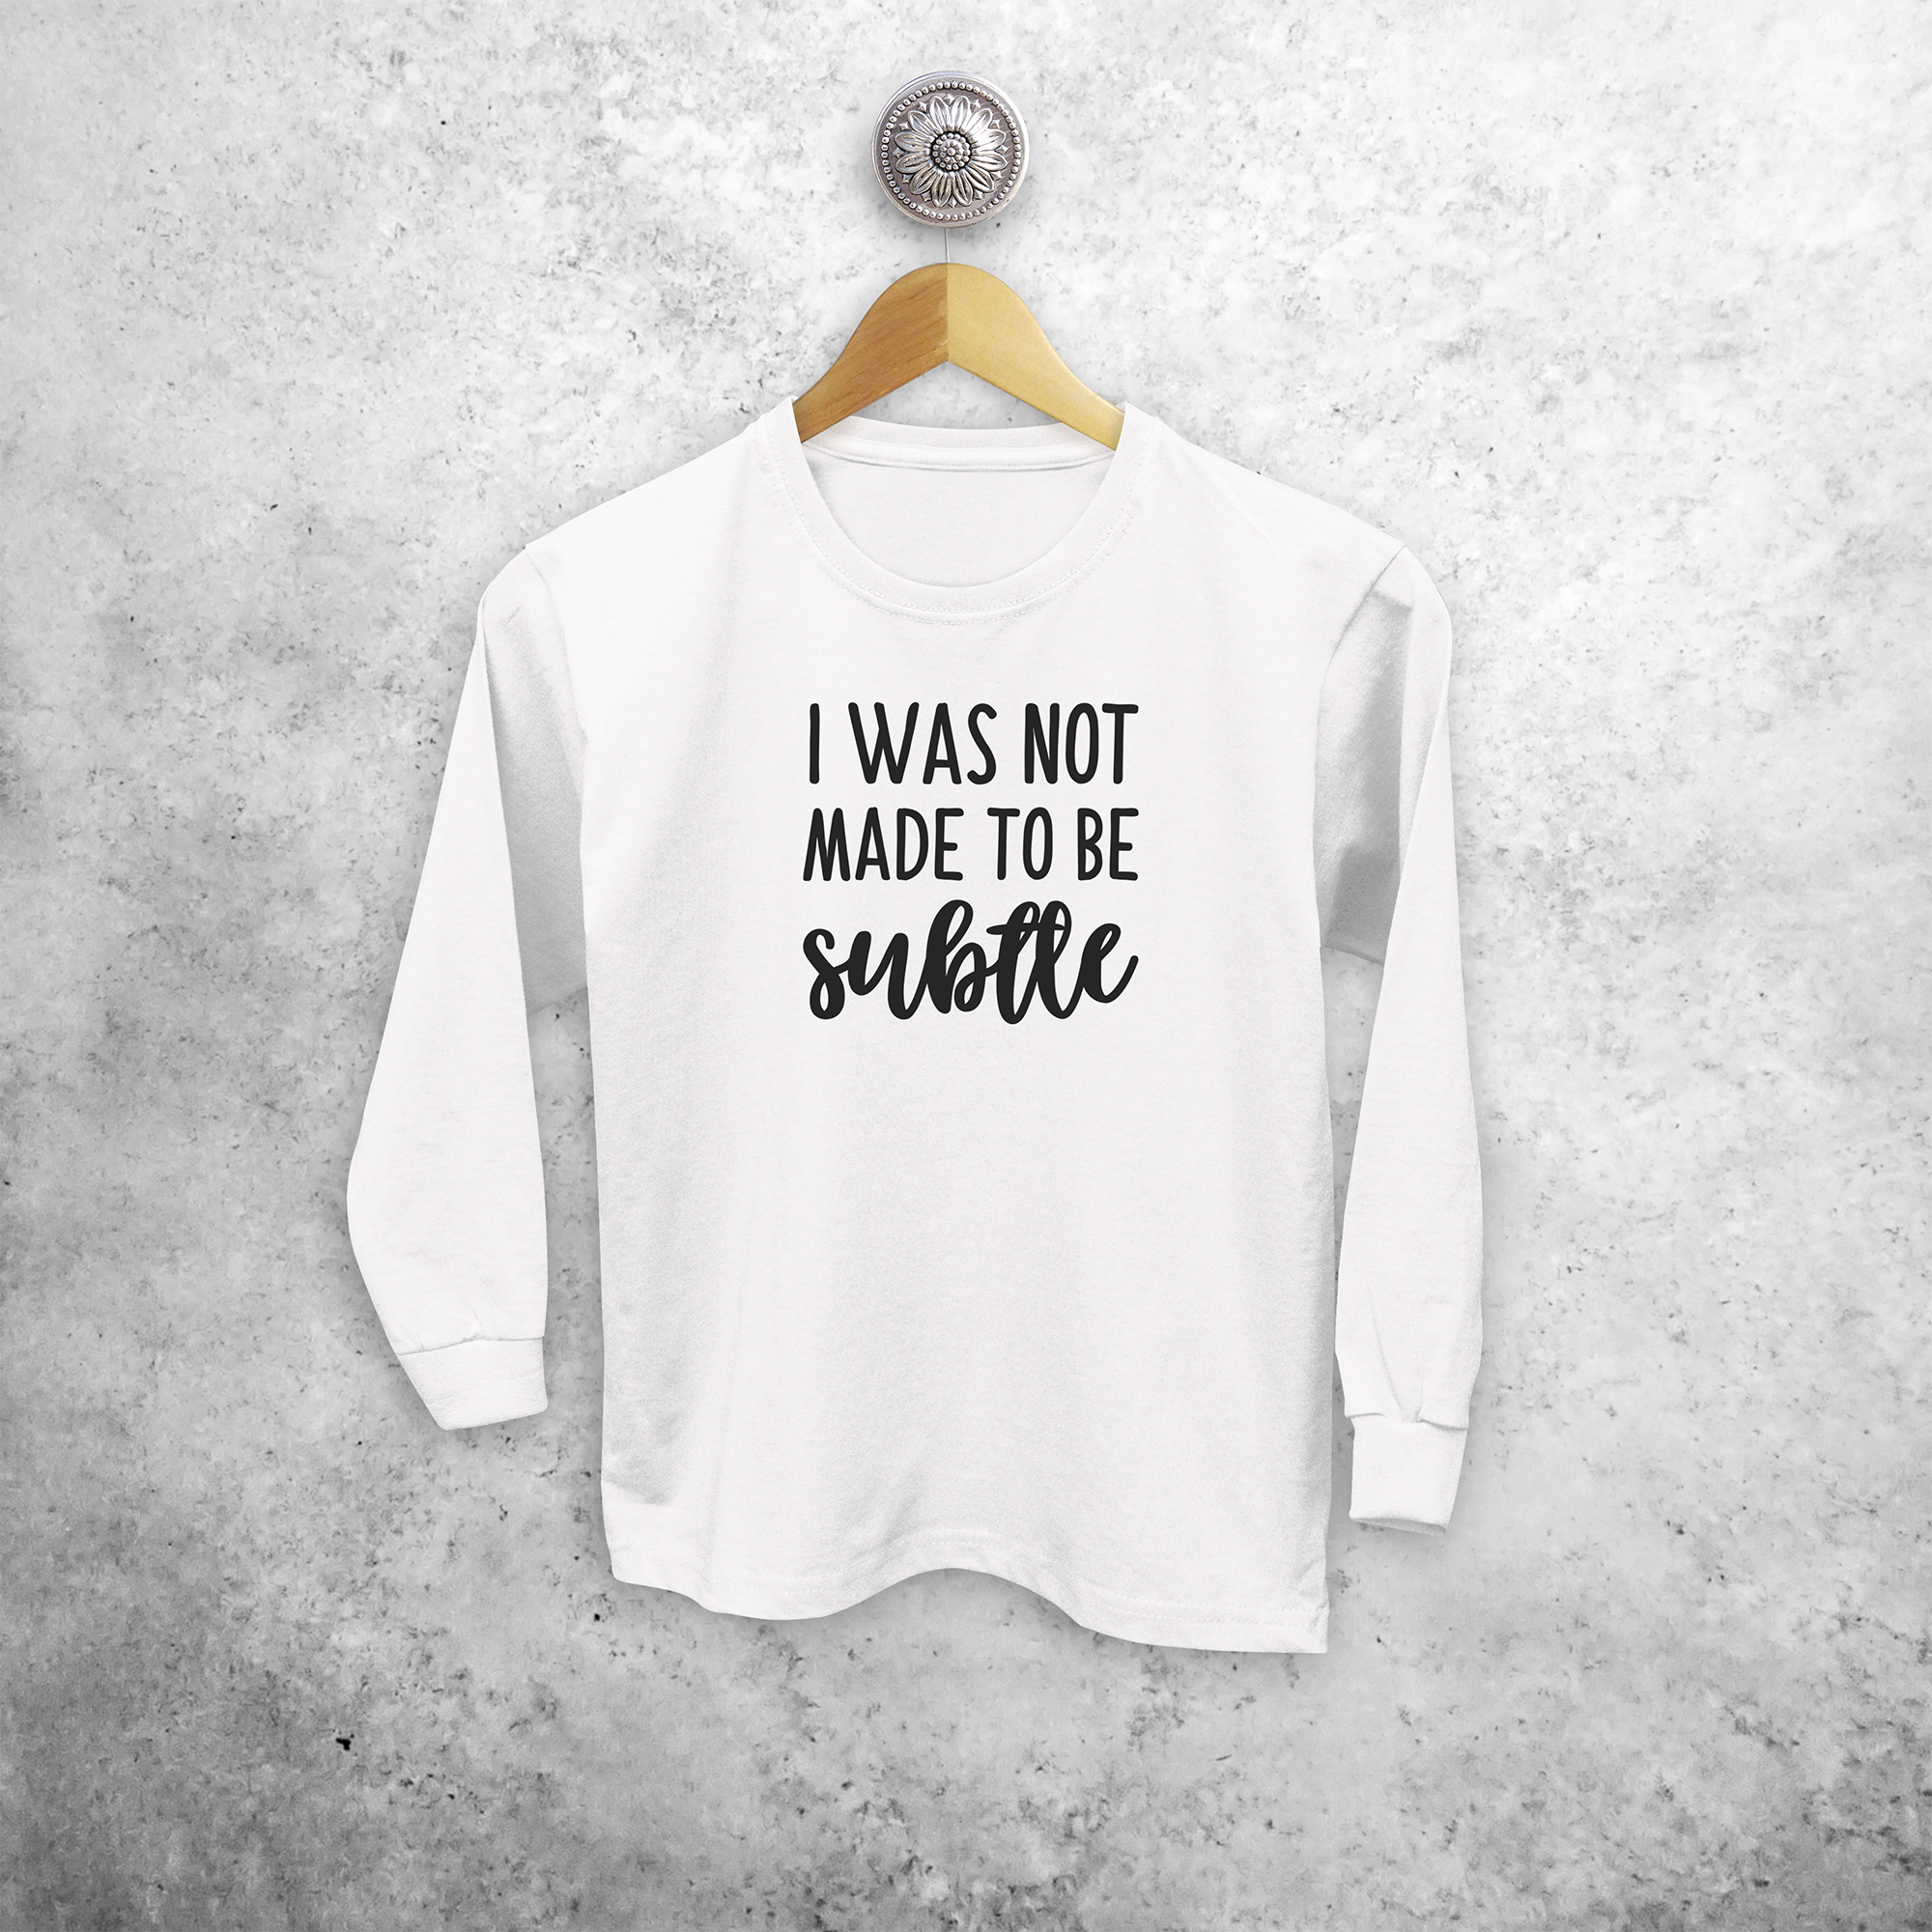 'I was not made to be subtle' kids longsleeve shirt